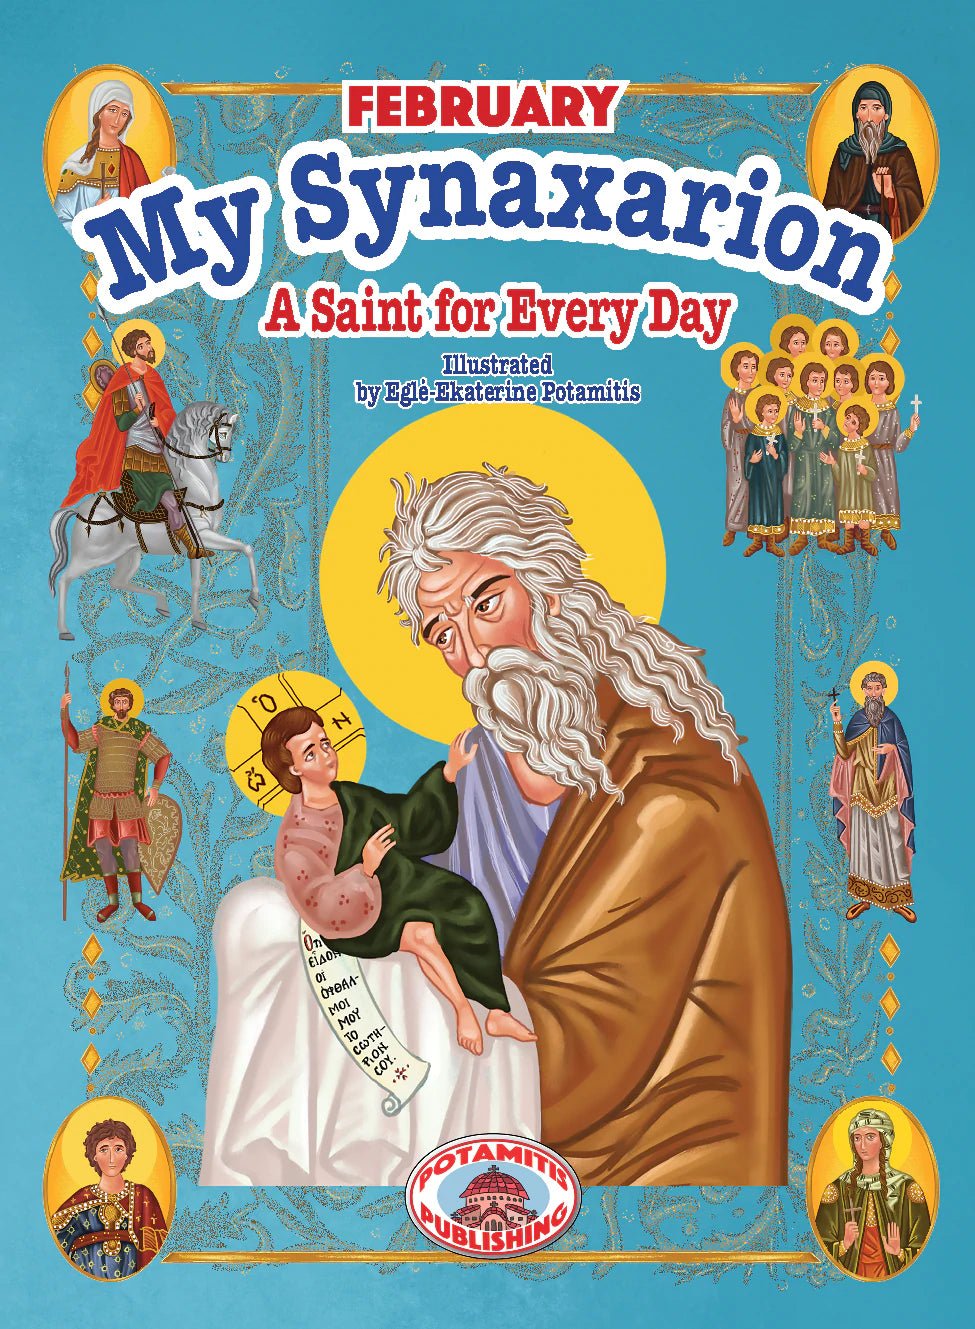 My Synaxarion - A Saint for Every Day [February] - Holy Cross Monastery